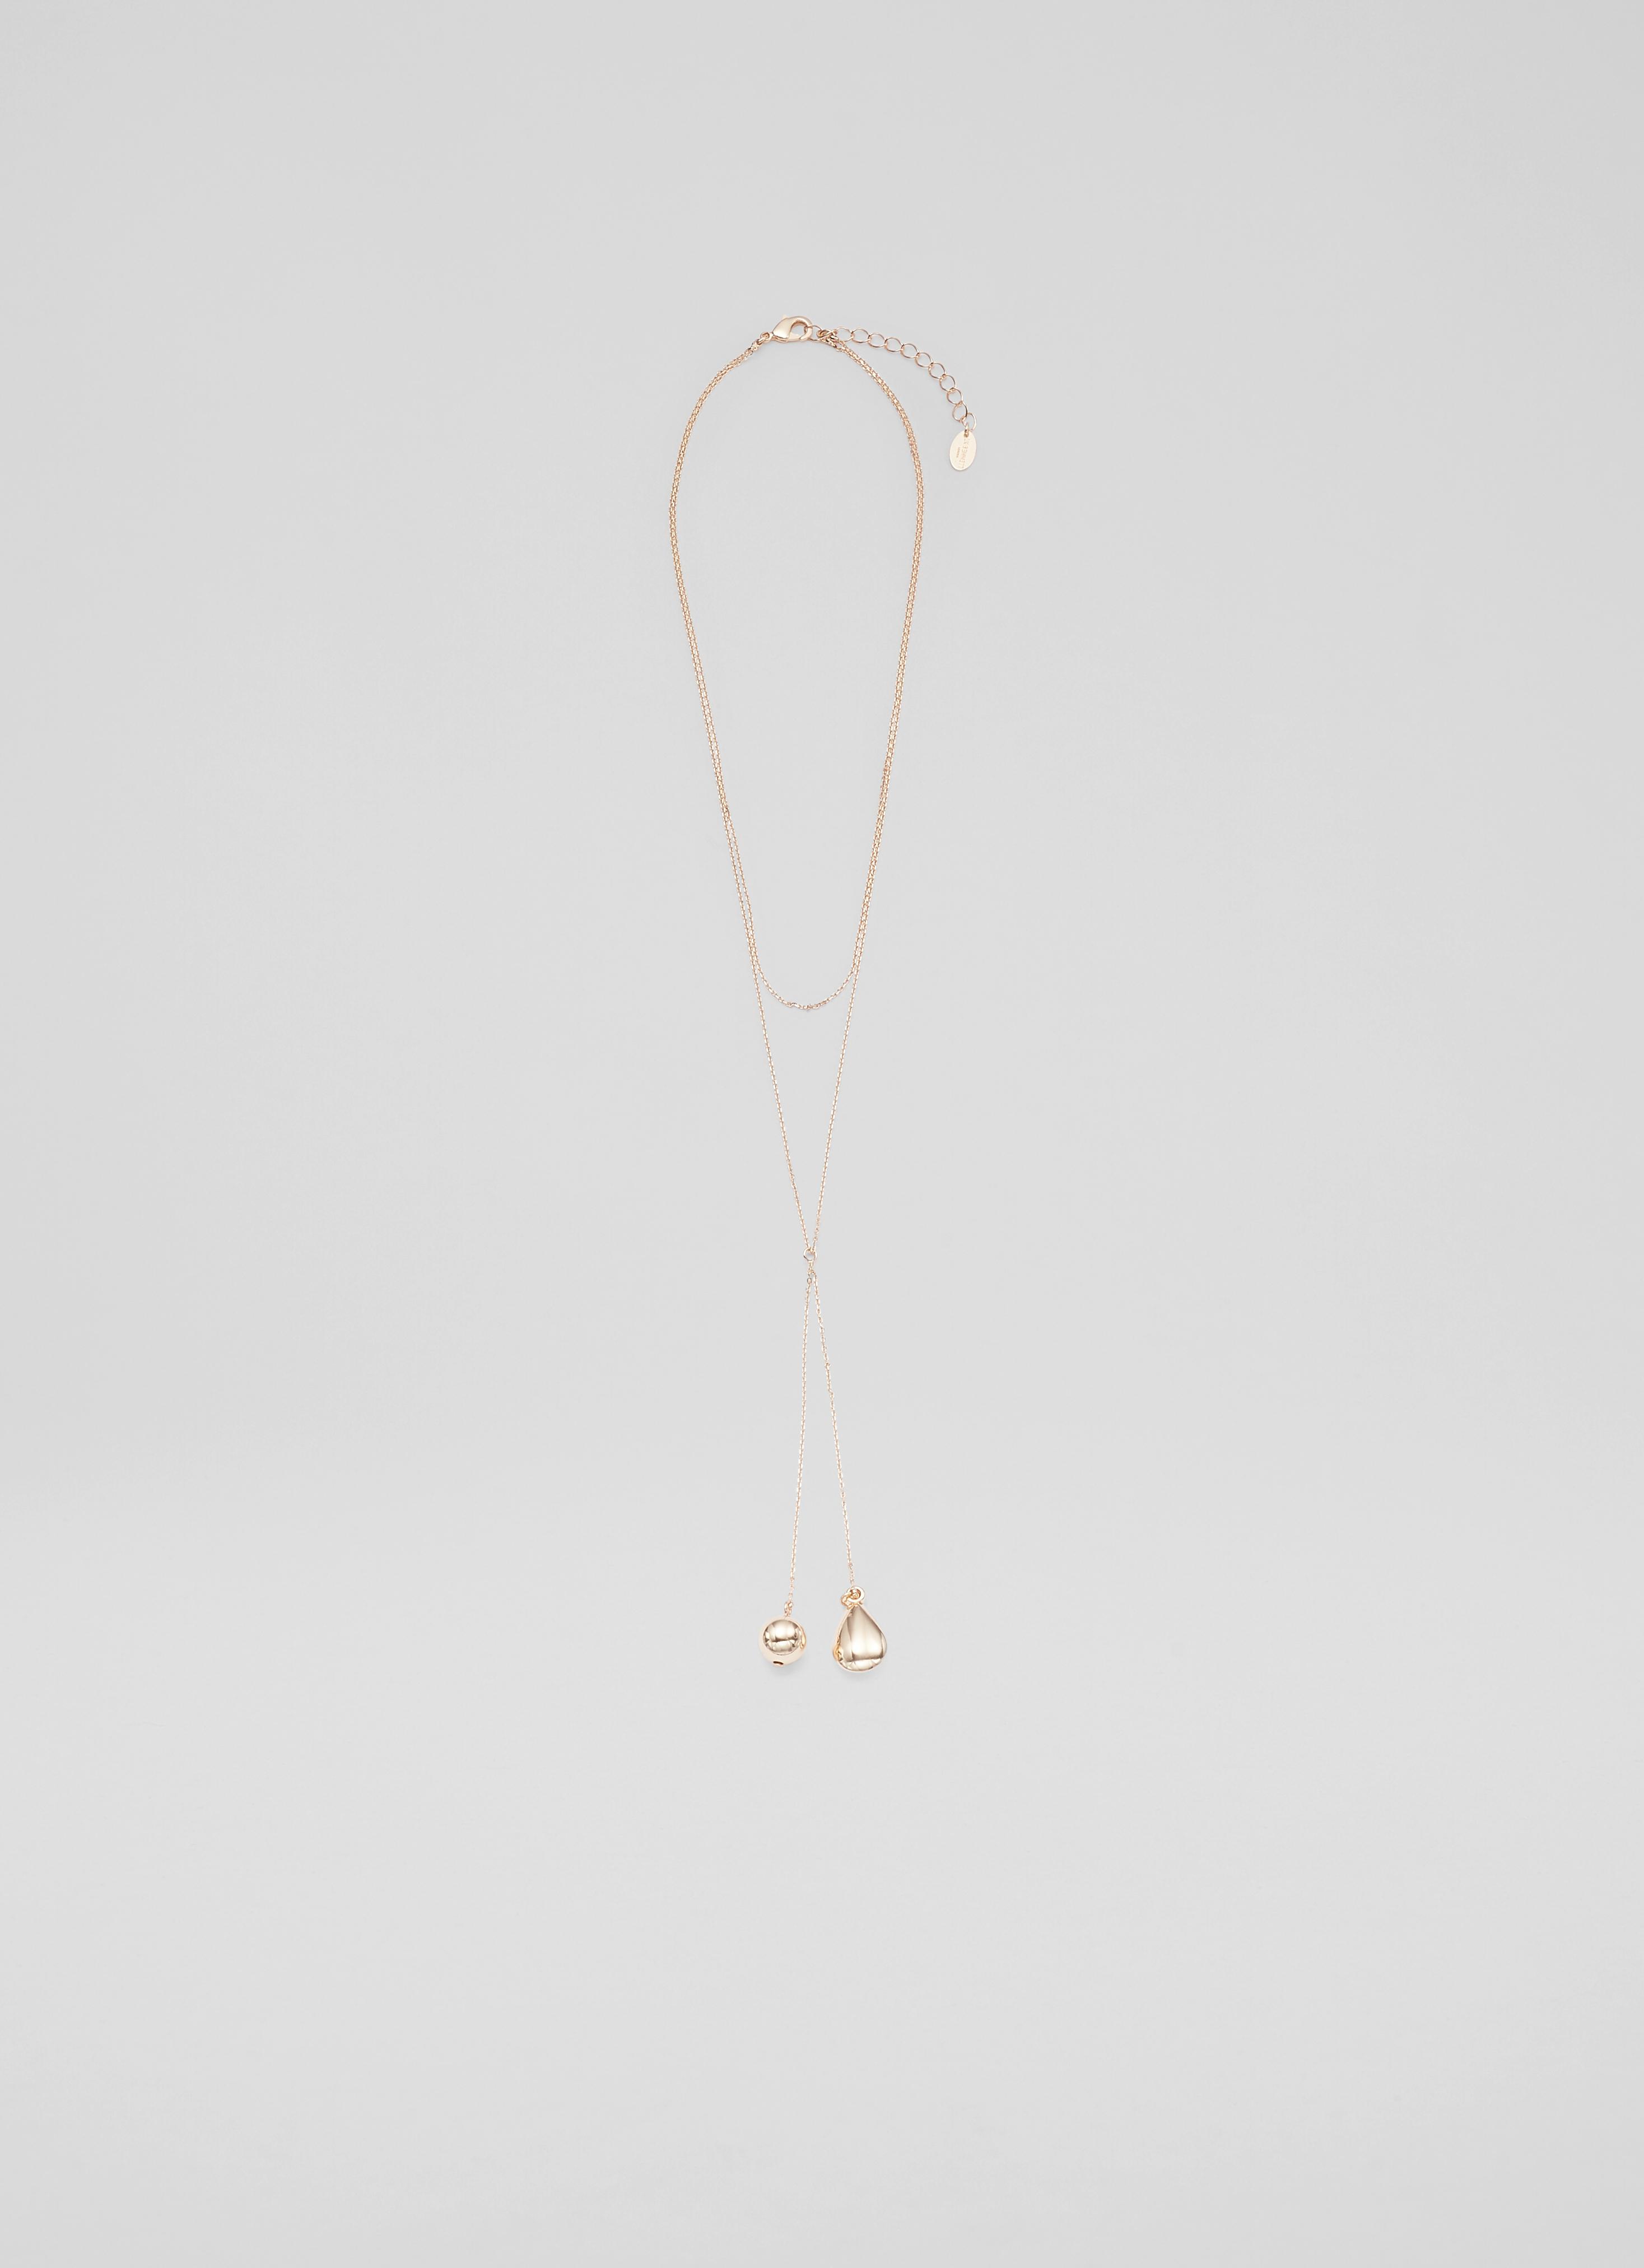 L.K.Bennett Tilly Gold Plated Chain Necklace, Gold